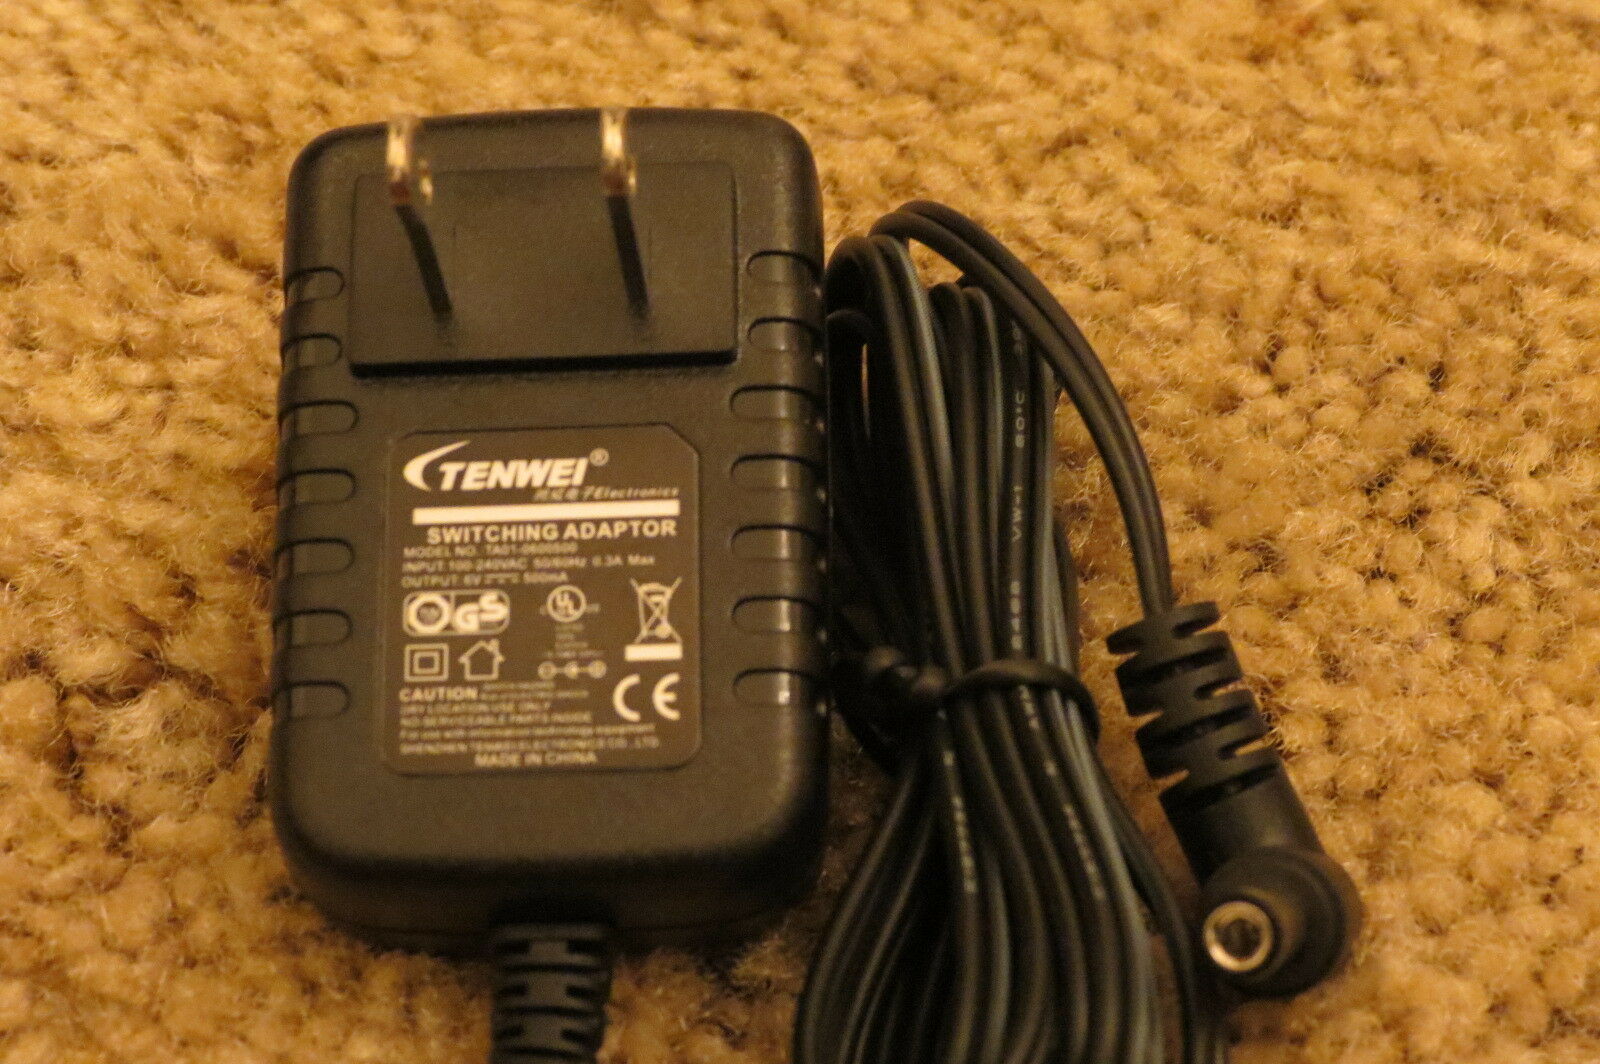 New TENWEI TD01-D600500 DC 6V 500mA Switching Power Supply Adapter